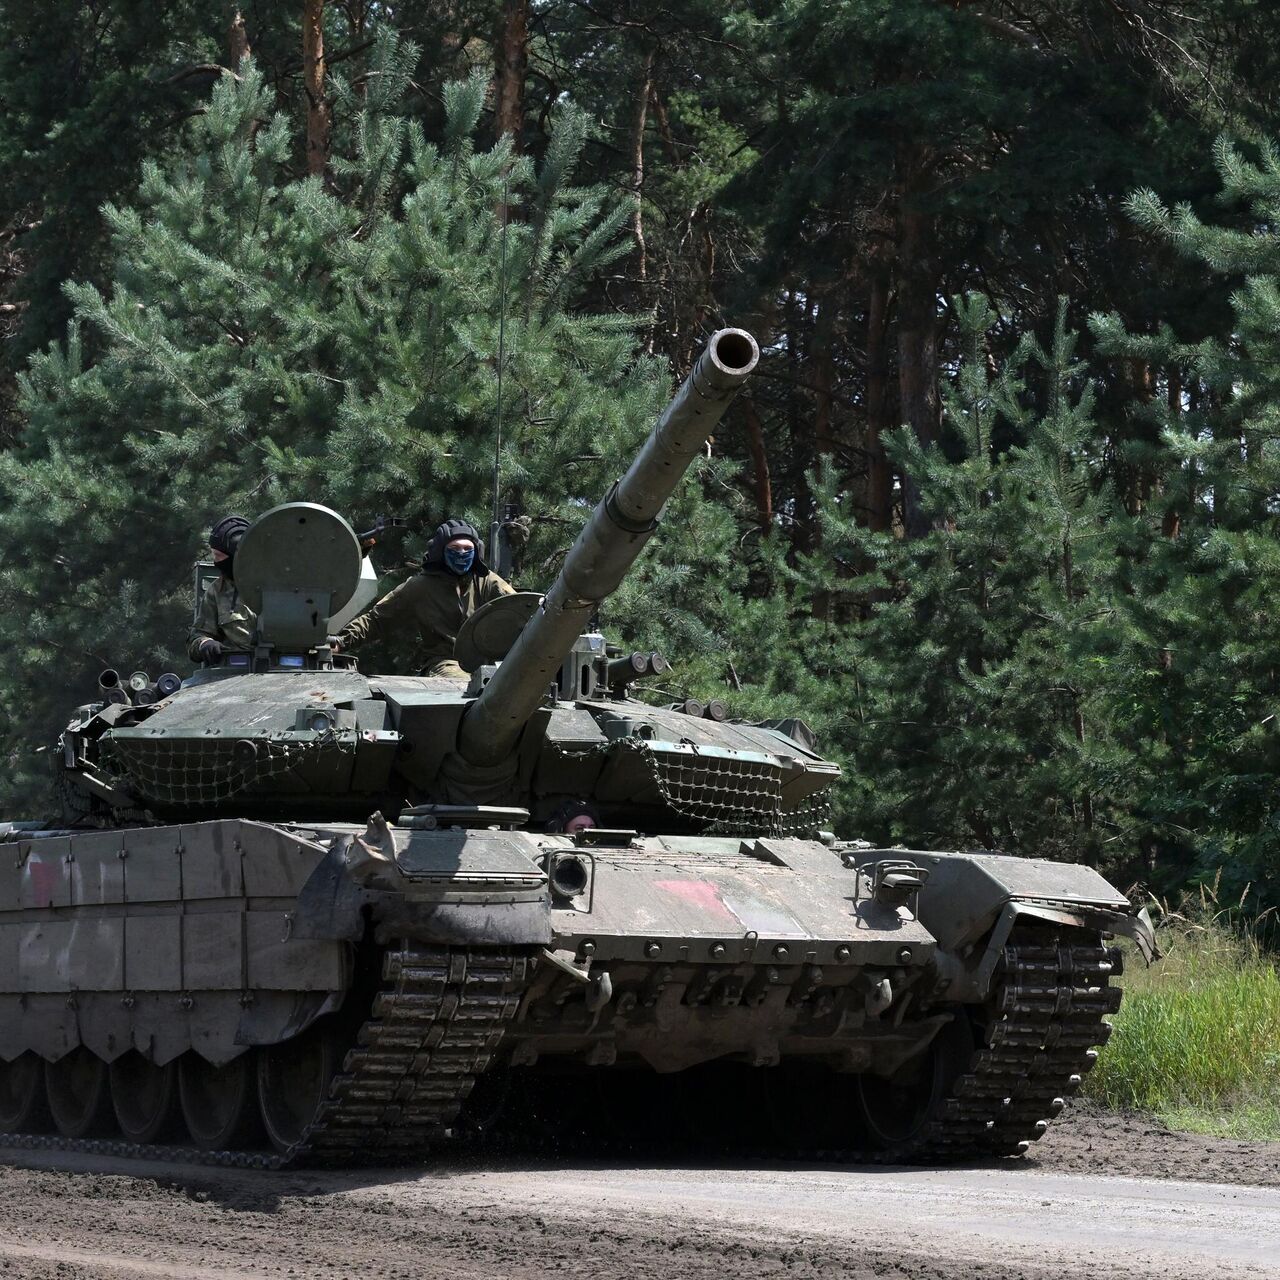 Protective camouflage 'cape' developed for Russian tanks - Defence Connect